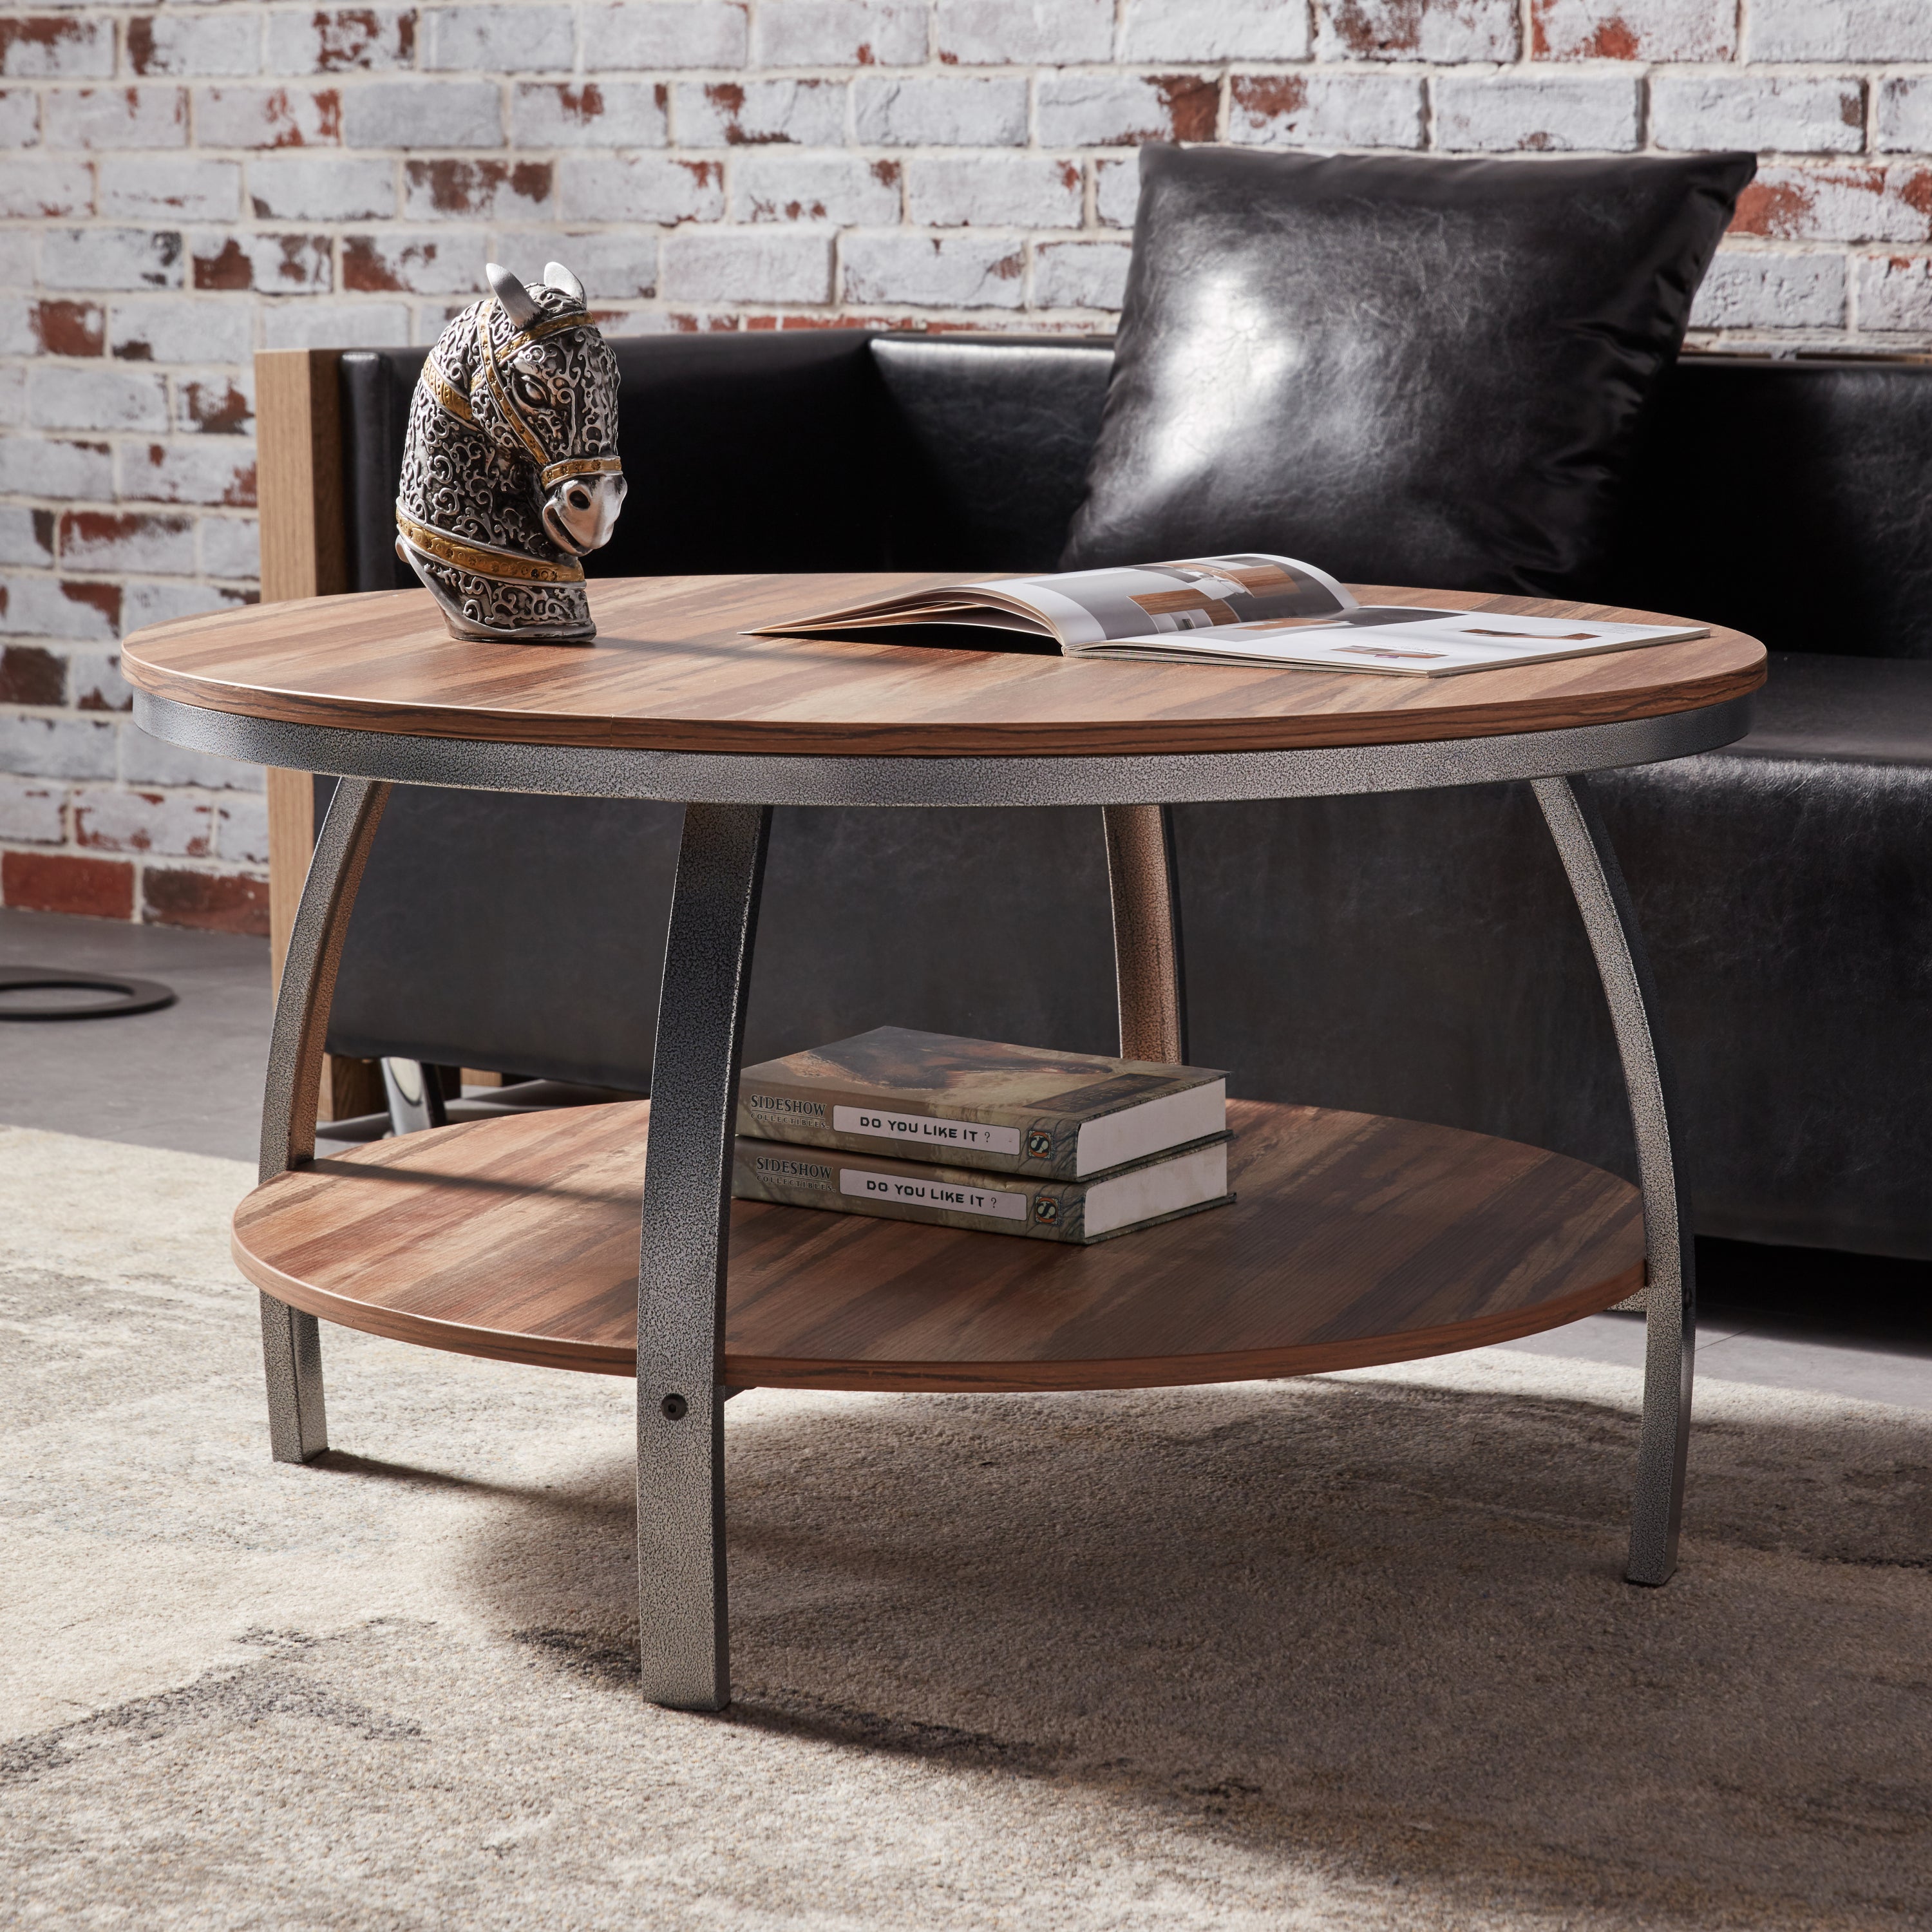 2 Tier Double Sided Round Coffee Table